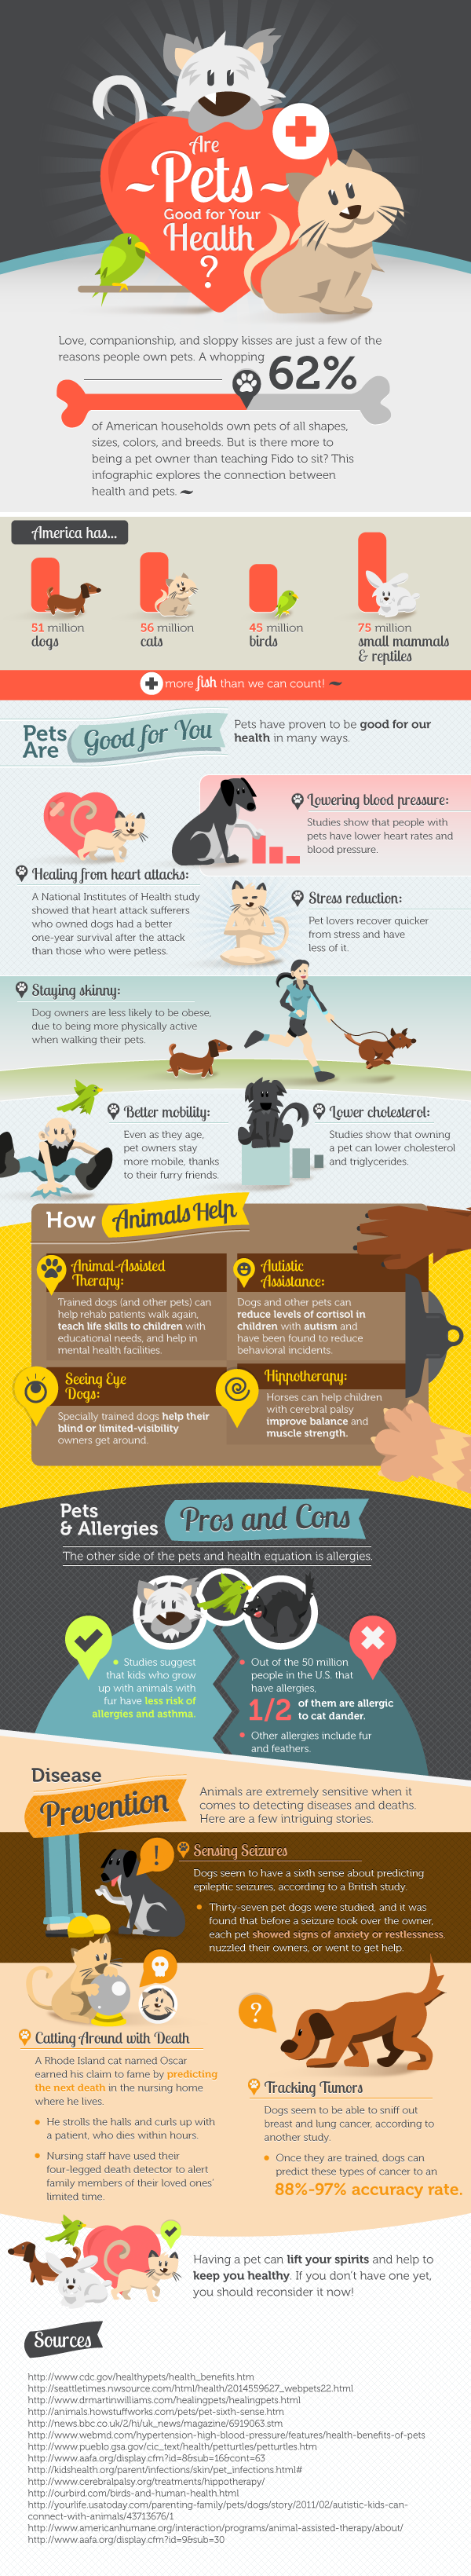 Are Pets Good For Your Health?